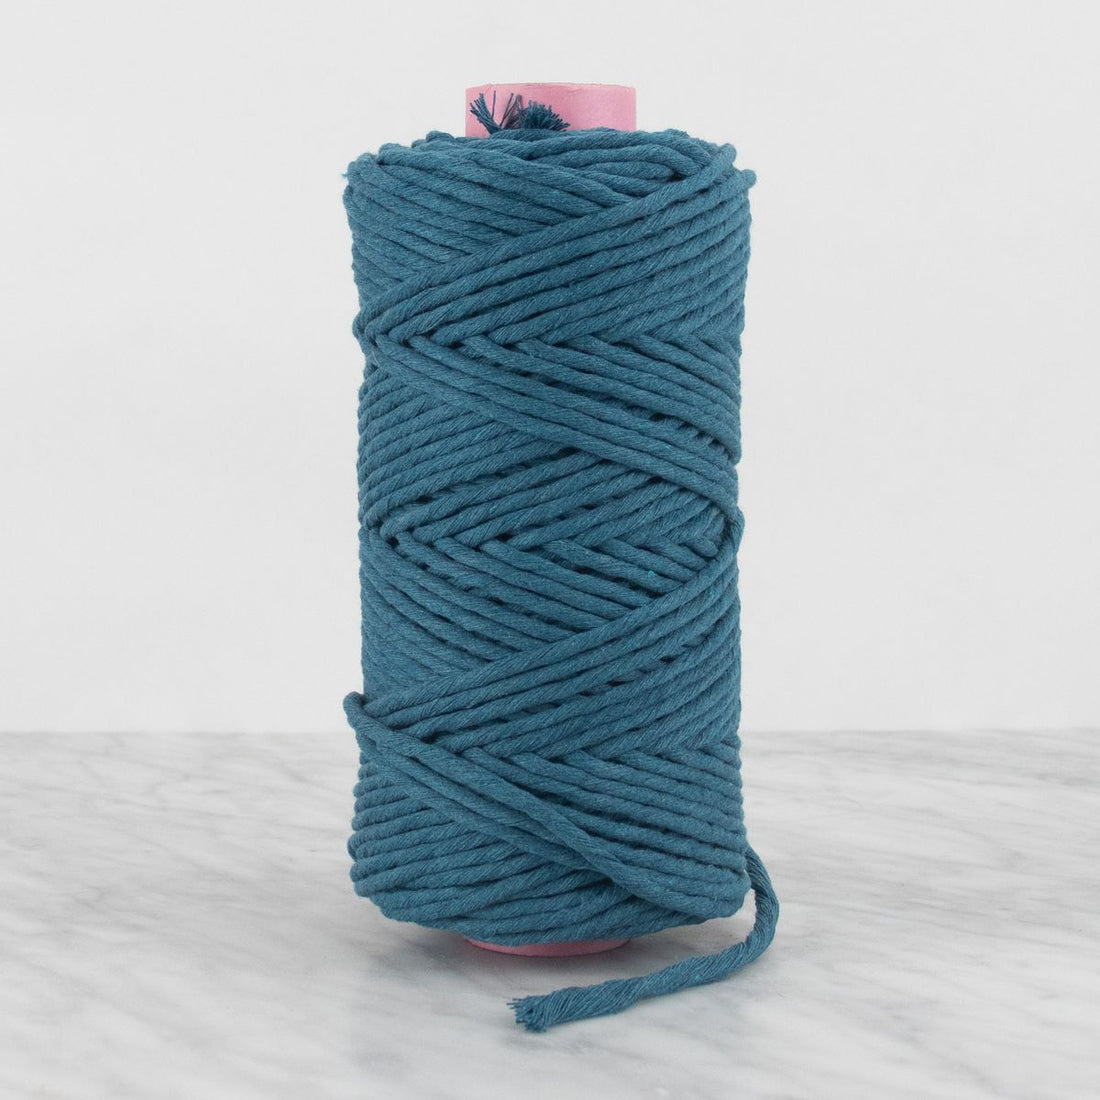 5mm Recycled Cotton String 0.5 kg - Deep Teal